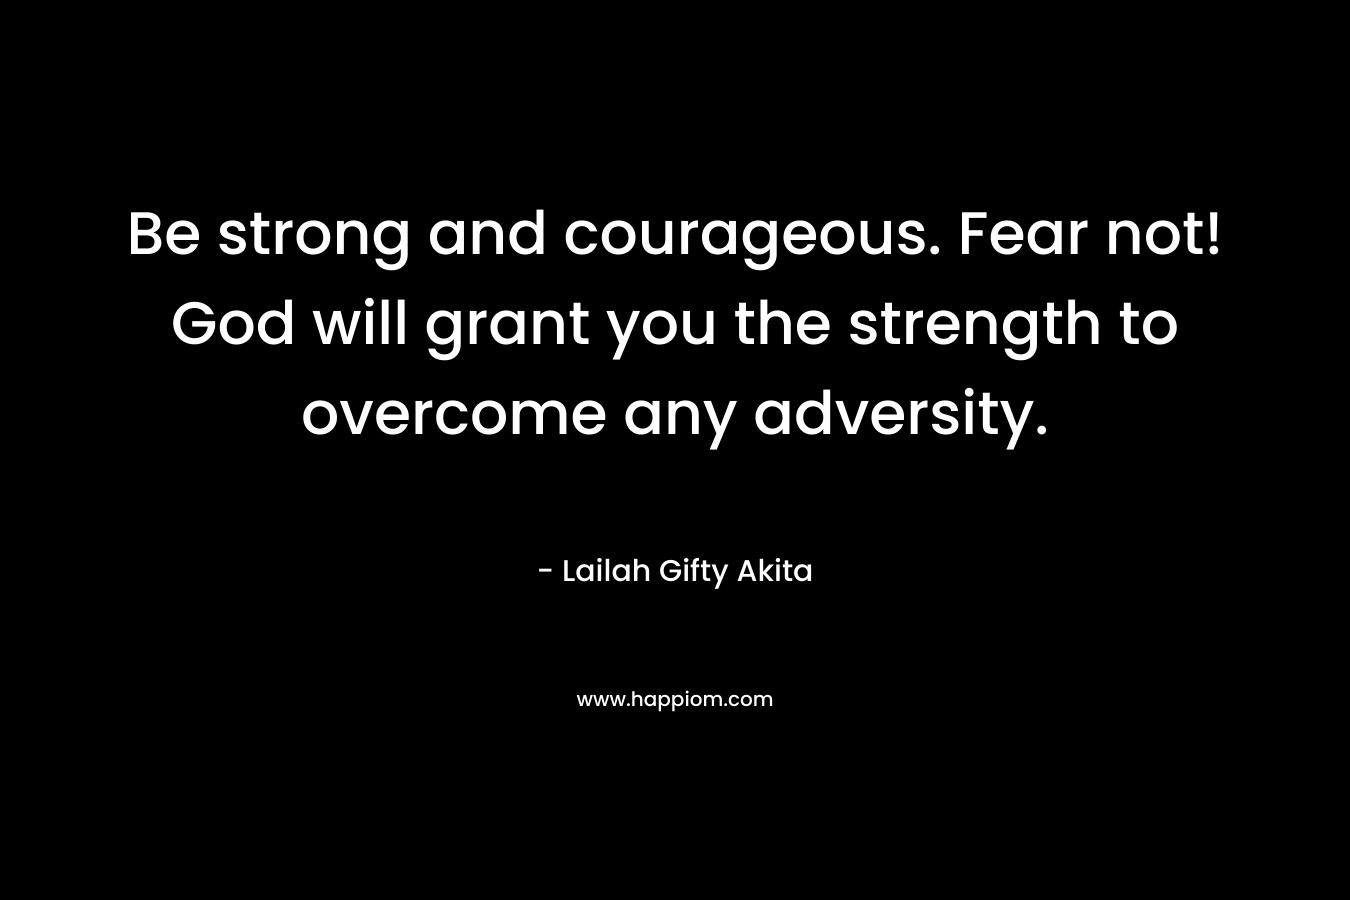 Be strong and courageous. Fear not! God will grant you the strength to overcome any adversity. – Lailah Gifty Akita